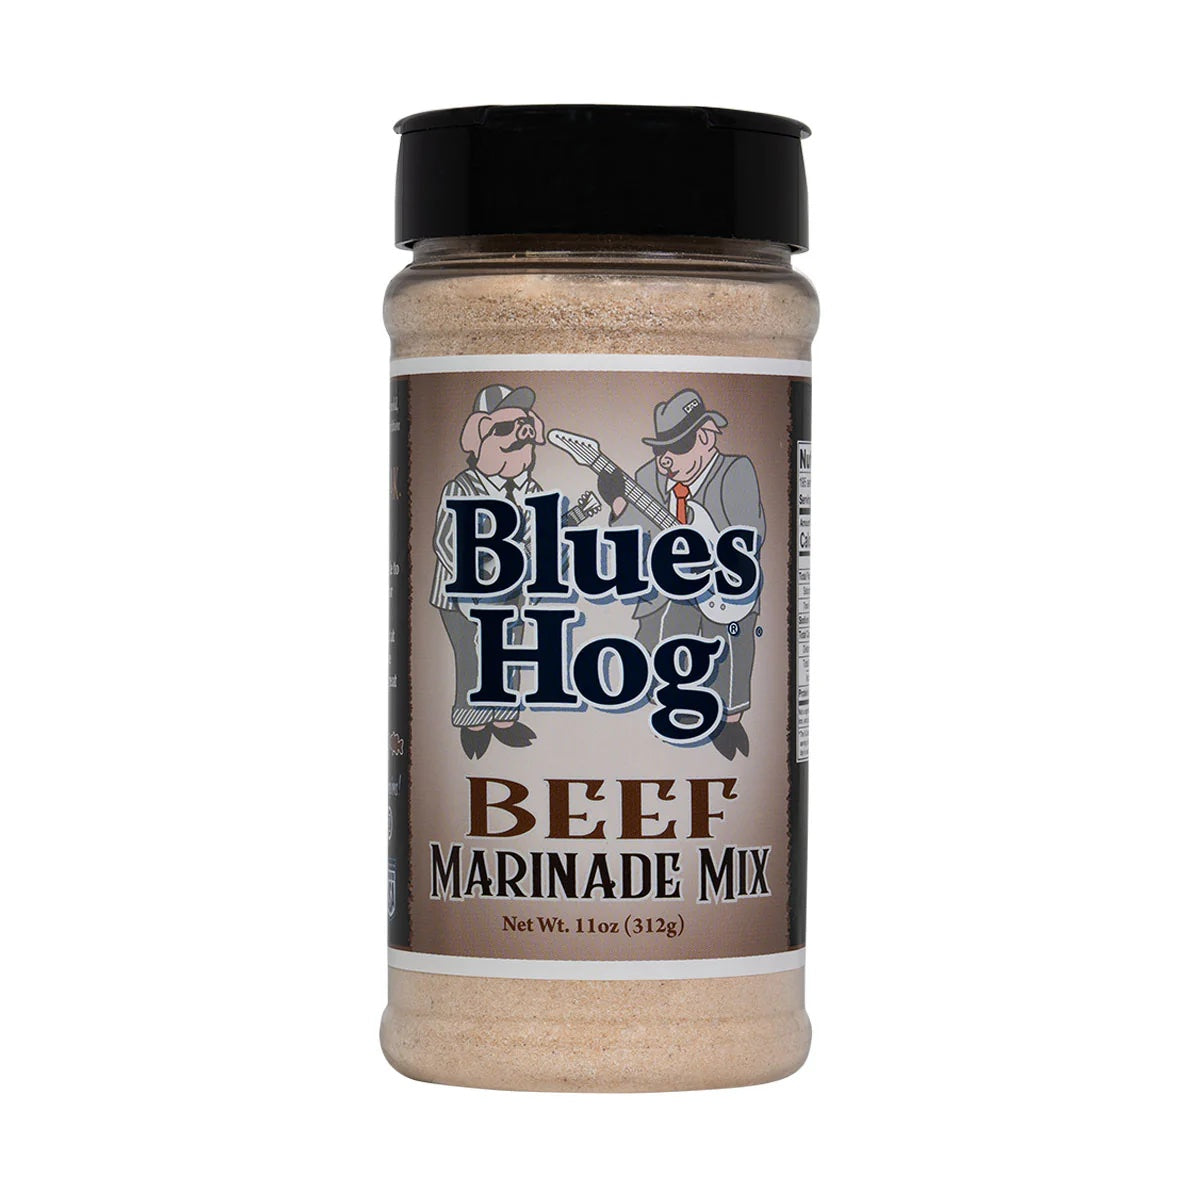 A jar of Blues Hog Beef Marinade Mix with a black lid, showing the front label. The label features the Blues Hog logo with two cartoon pigs dressed as musicians, one playing a guitar and the other holding a microphone. The label reads 'Blues Hog Beef Marinade Mix' and indicates the net weight of 11 ounces (312 grams).